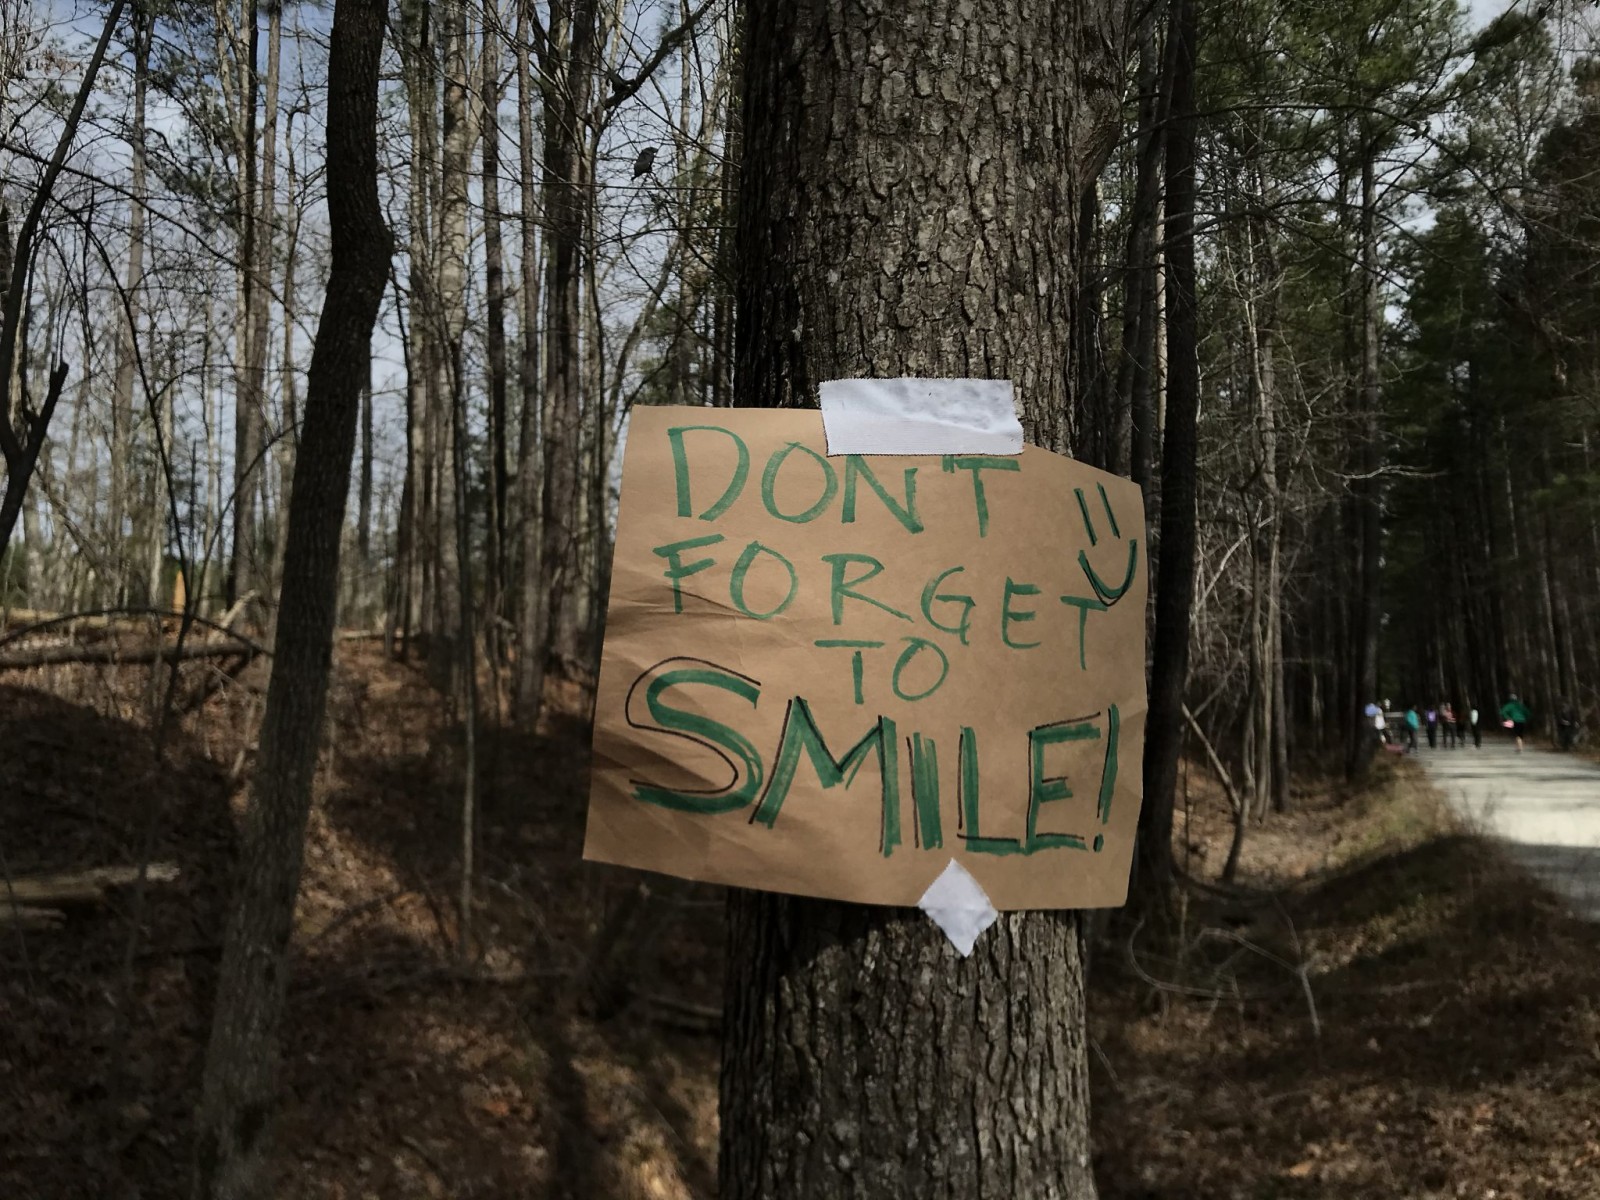 Due to COVID-19, the 2020 Tobacco Road Marathon and Half Marathon was cancelled  but runners still came out to run the course as a sign encouraging runners during the cancelled event. March 15, 2020. Apex, NC